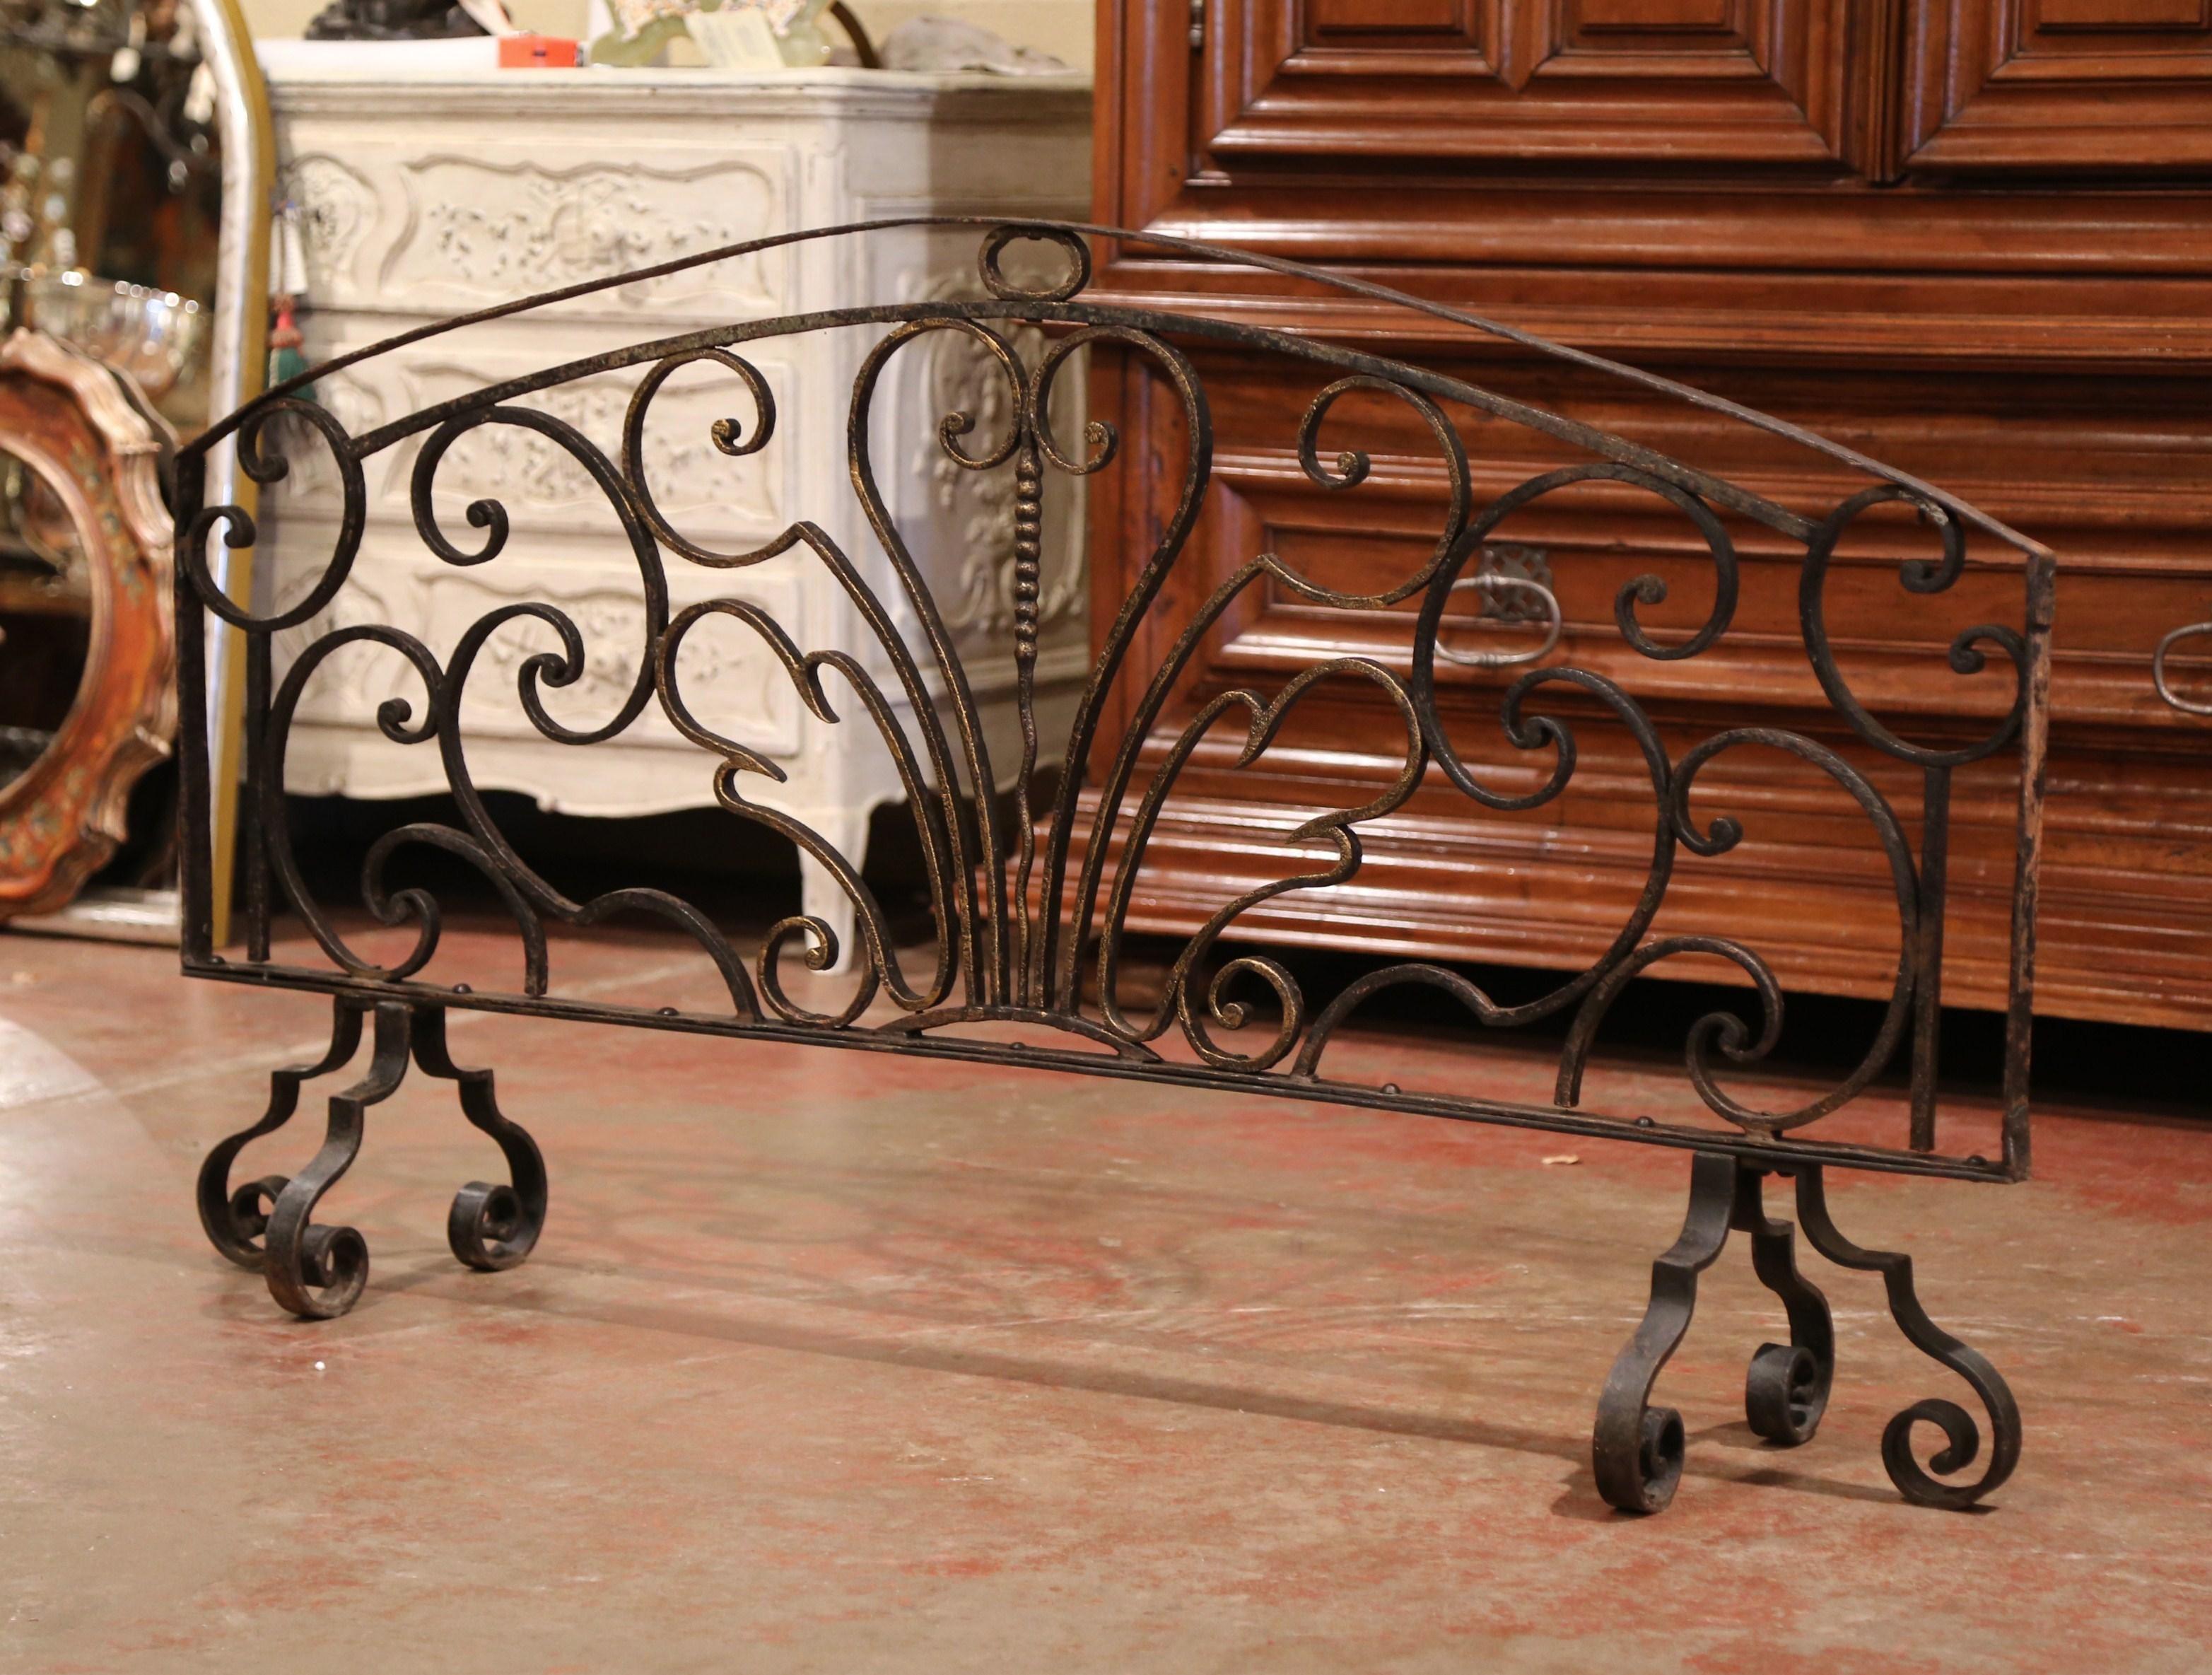 Decorate a fireplace hearth with this impressive freestanding antique iron screen. Forged in France circa 1760, the important wrought iron screen with arched top stands on six scrolled feet and features decorative scroll work throughout. The